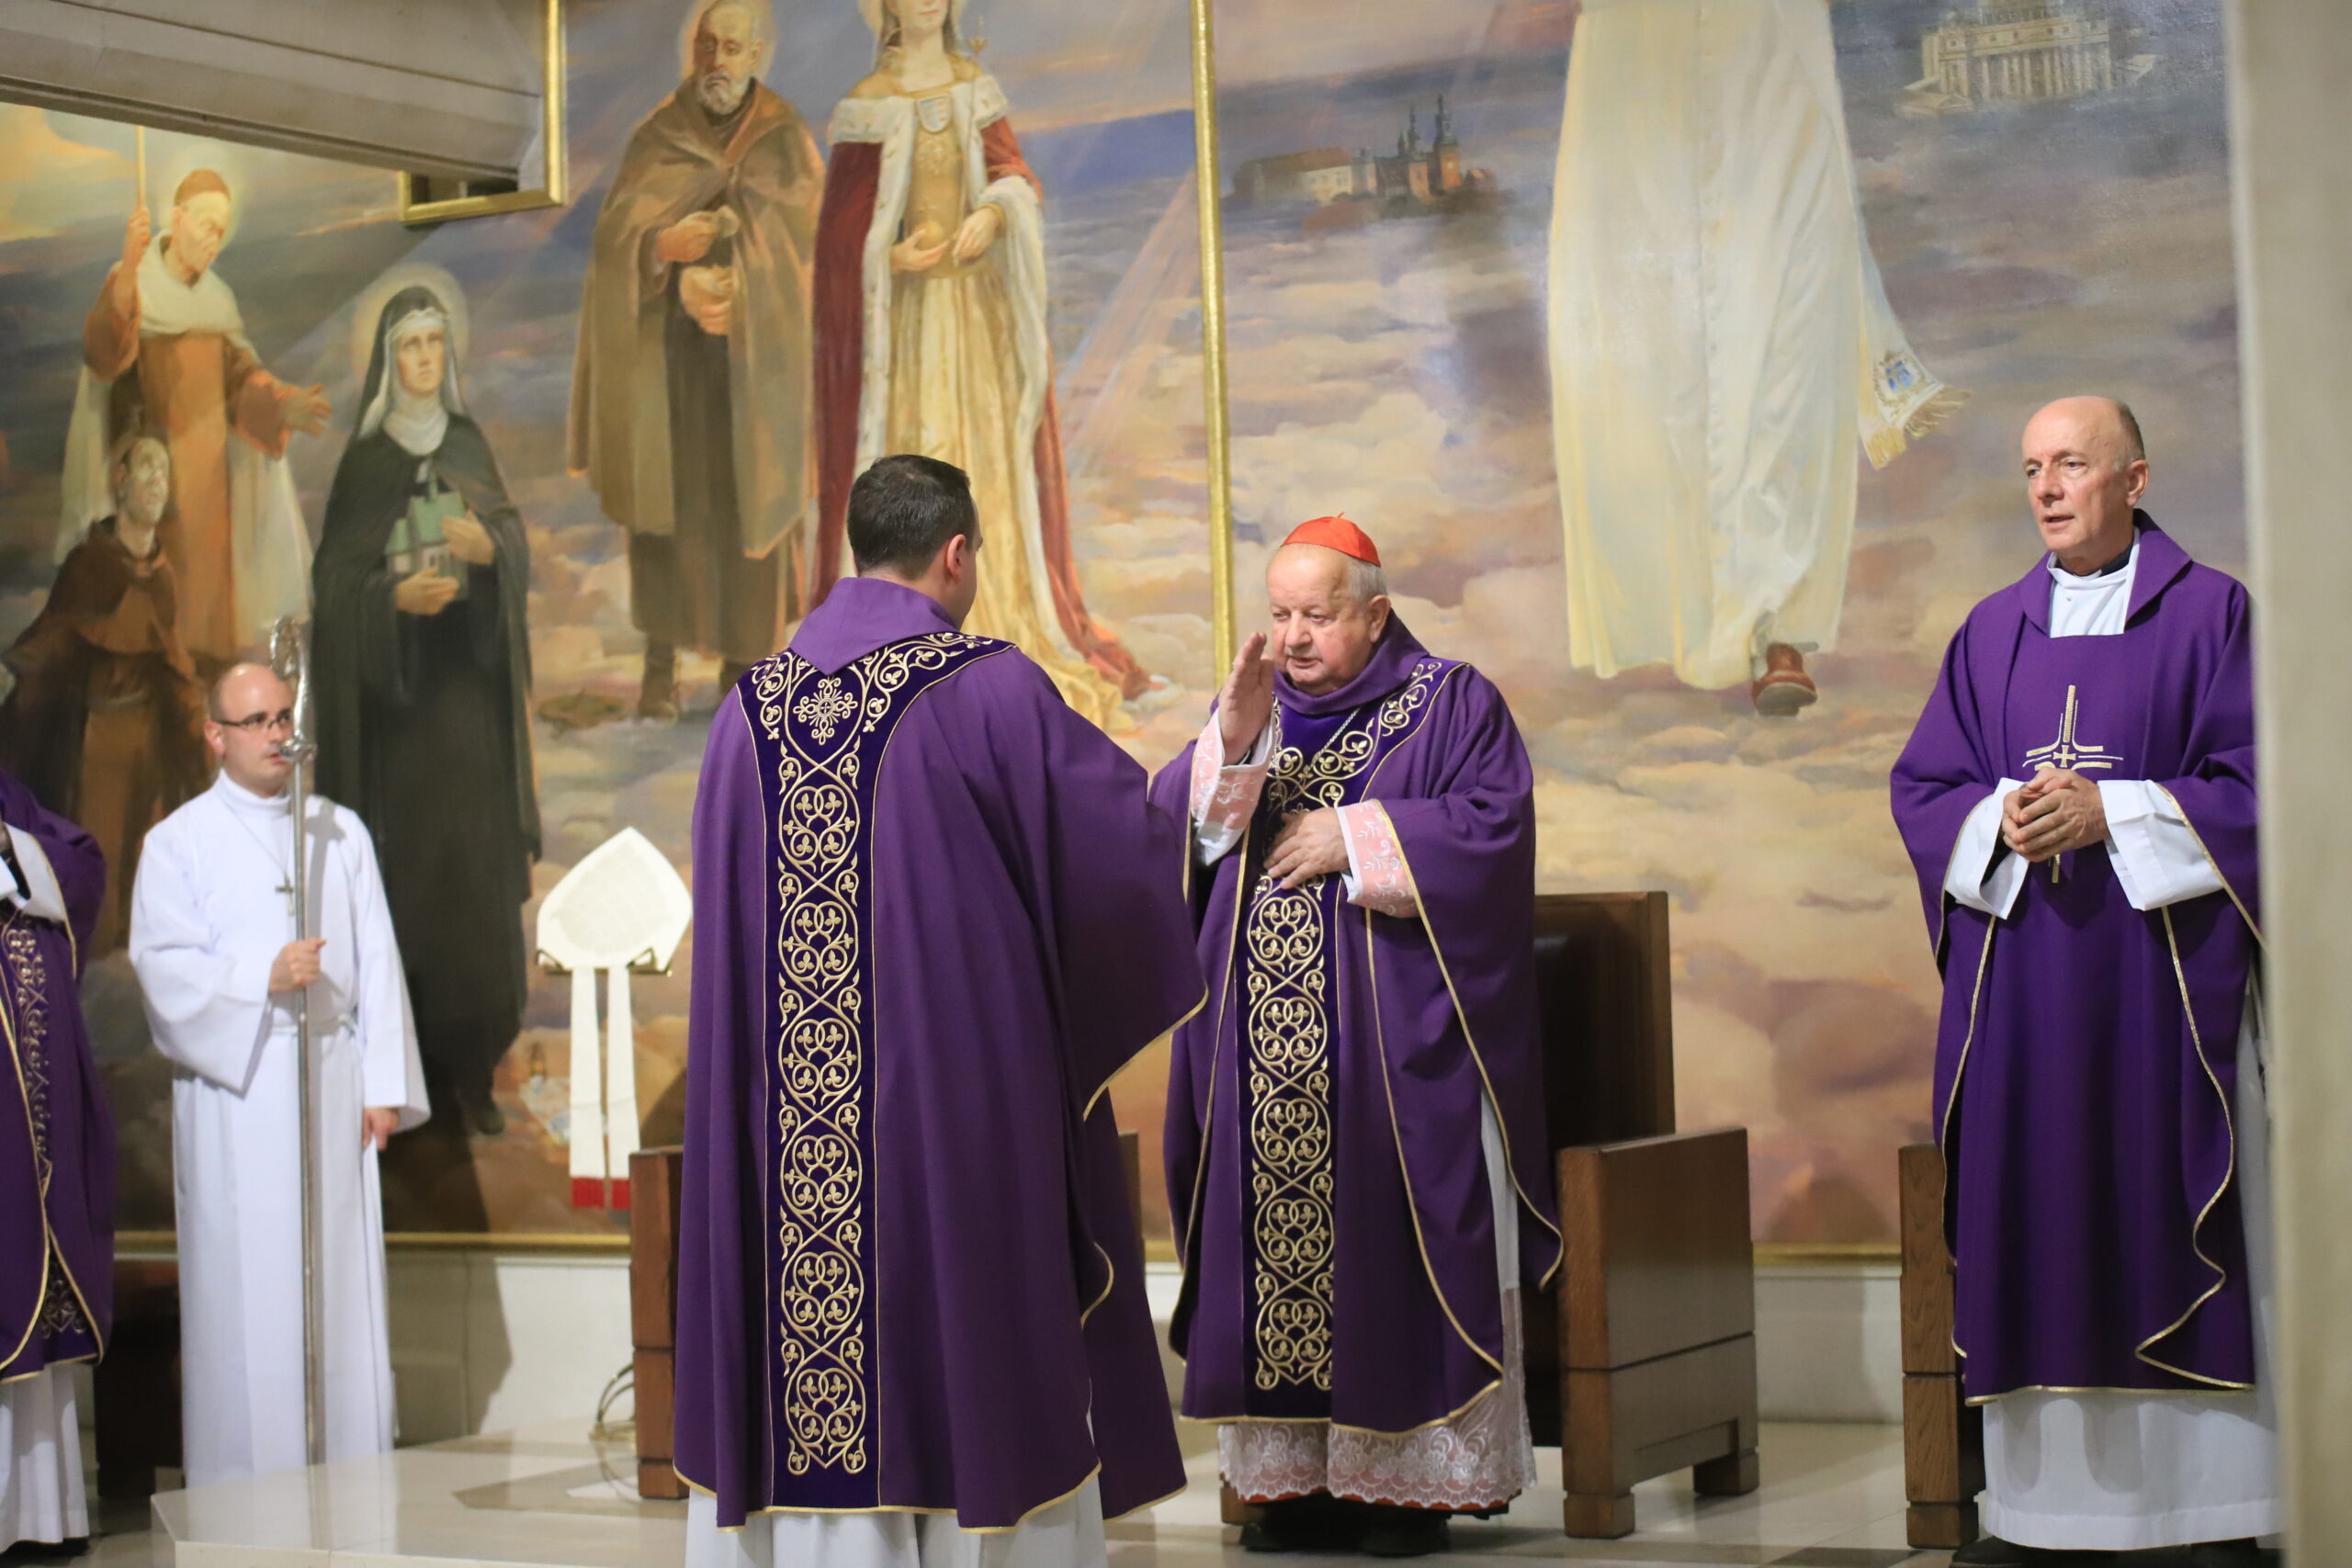 A Catholic cardinal in purple robes makes the sign of the cross in front of another member of the Catholic clergy, who is wearing similar purple robes. There is a mural of various Catholic figures and saints in the background.